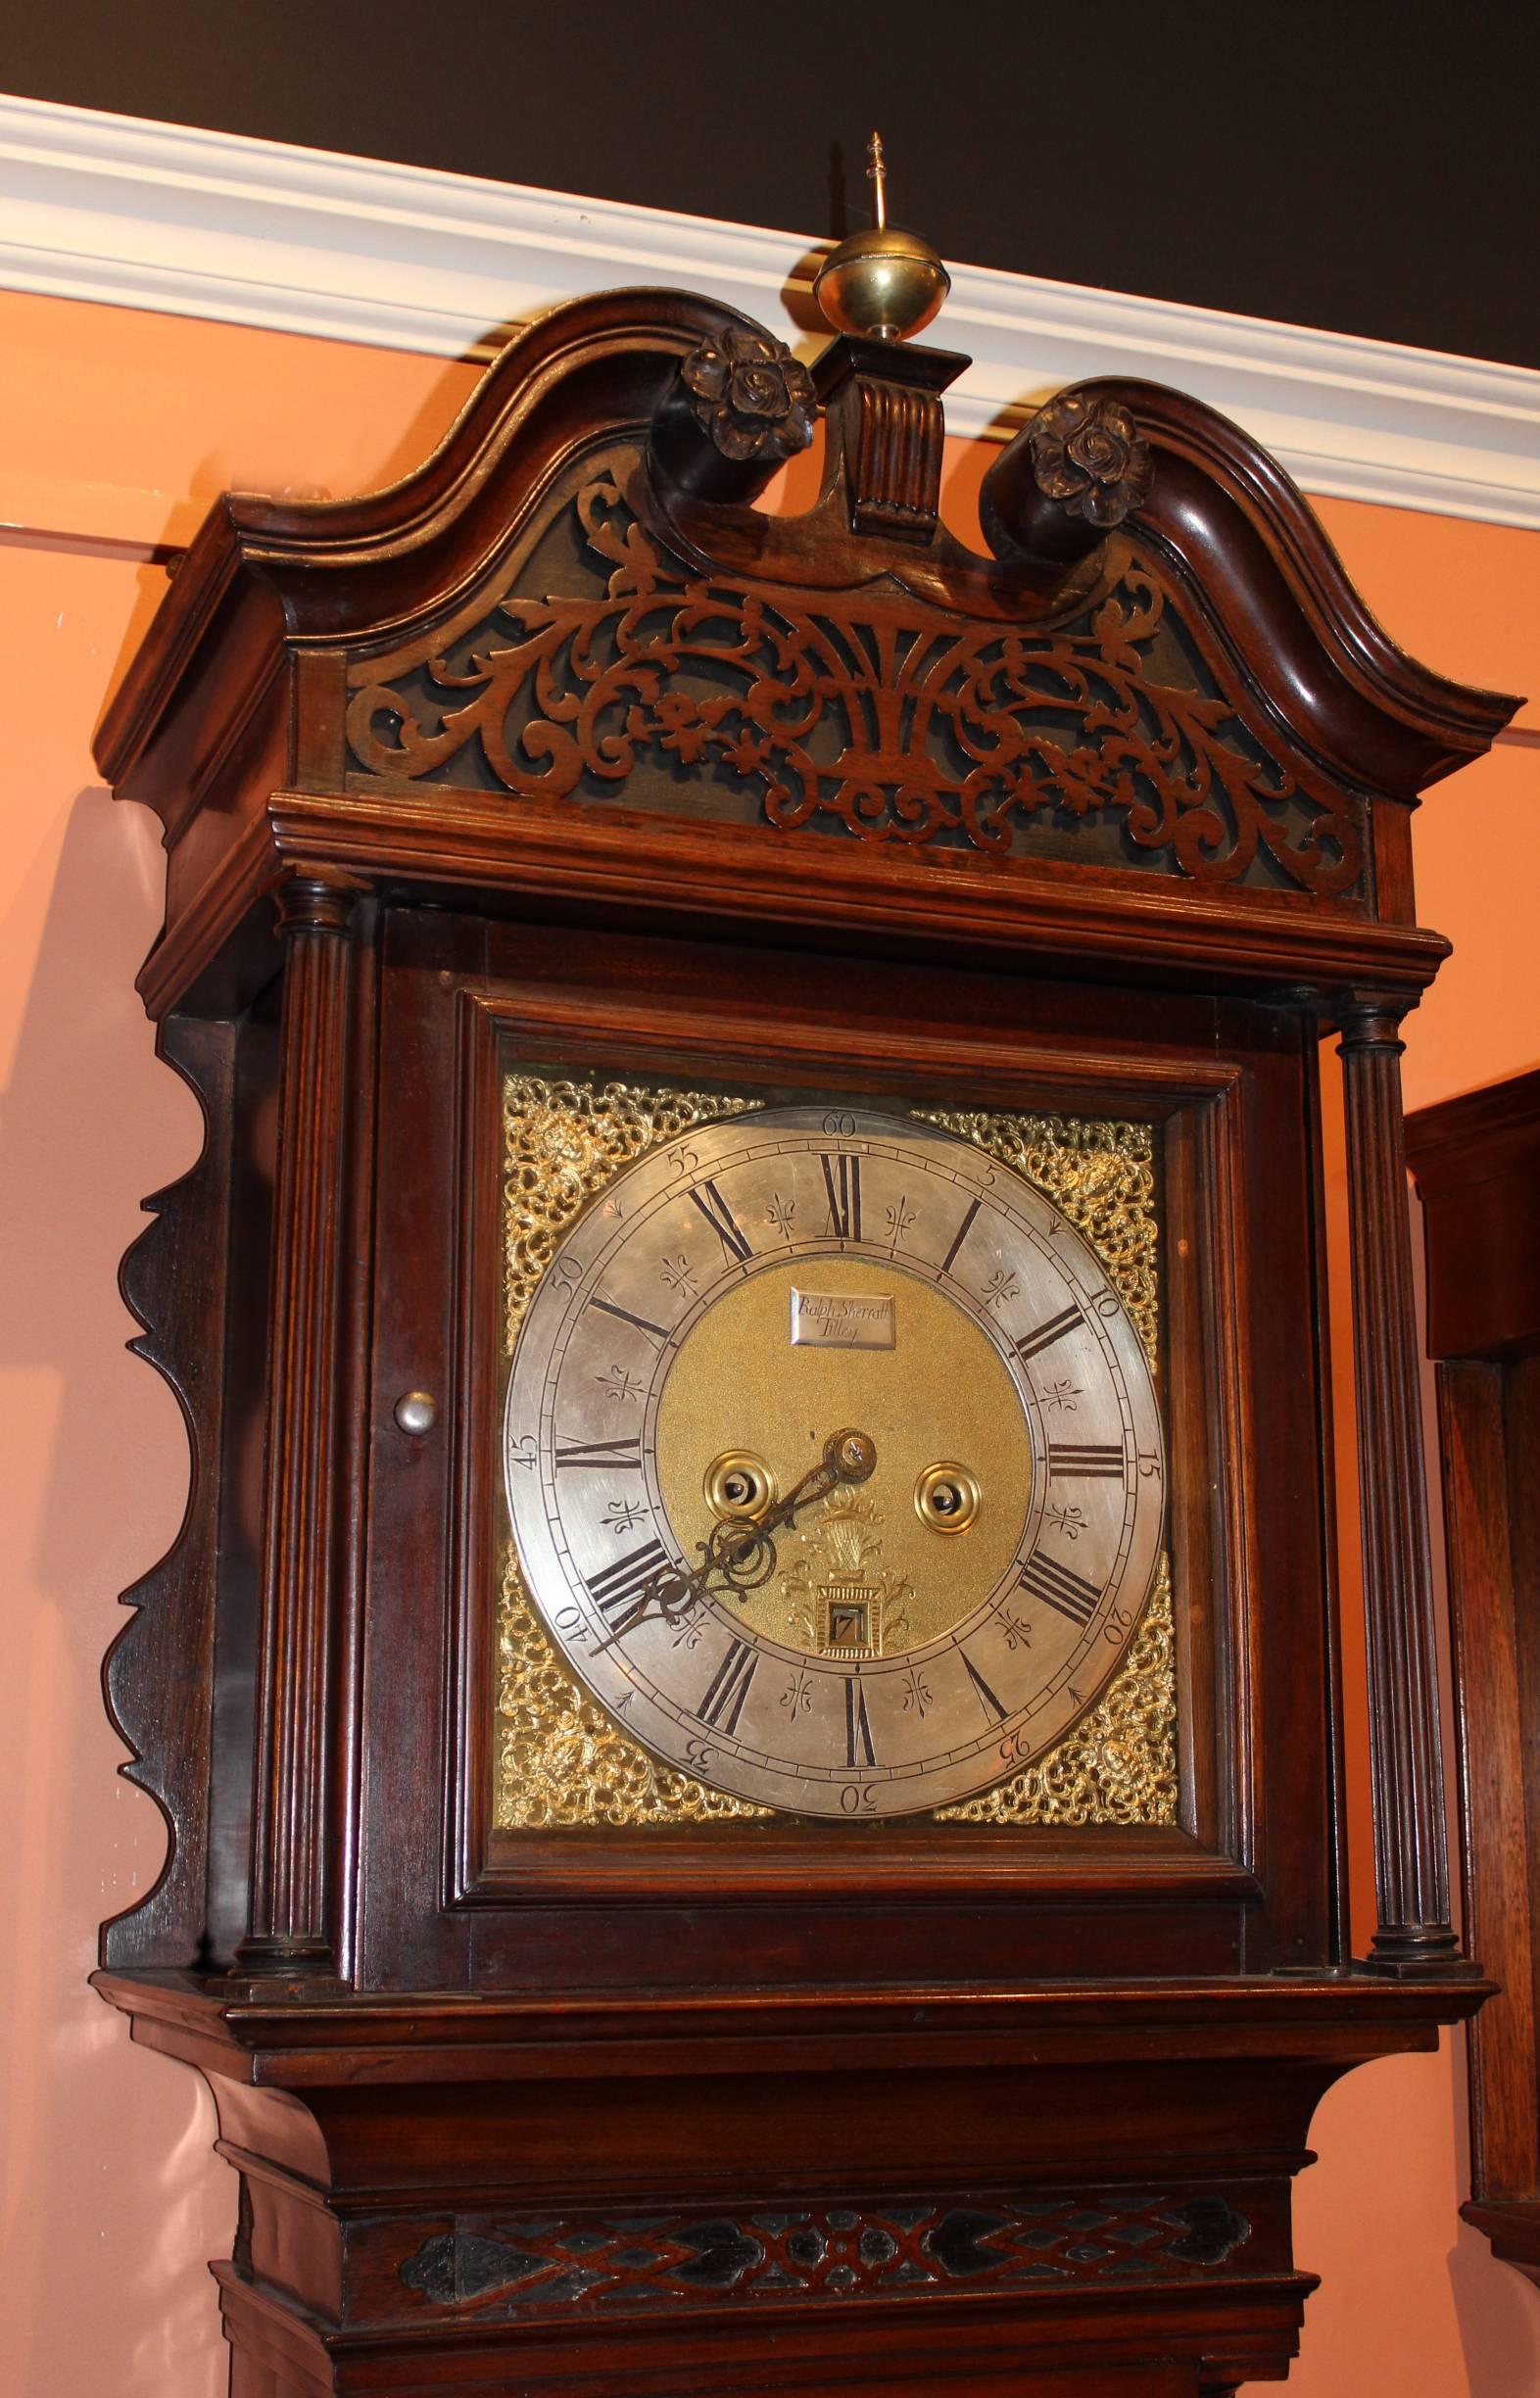 A Georgian Chippendale mahogany tall case clock, probably 18th century English, with carved swan neck broken pediment, around a single central brass ball finial with spire, fluted columns flanking the brass Roman numeral dial with matted center,